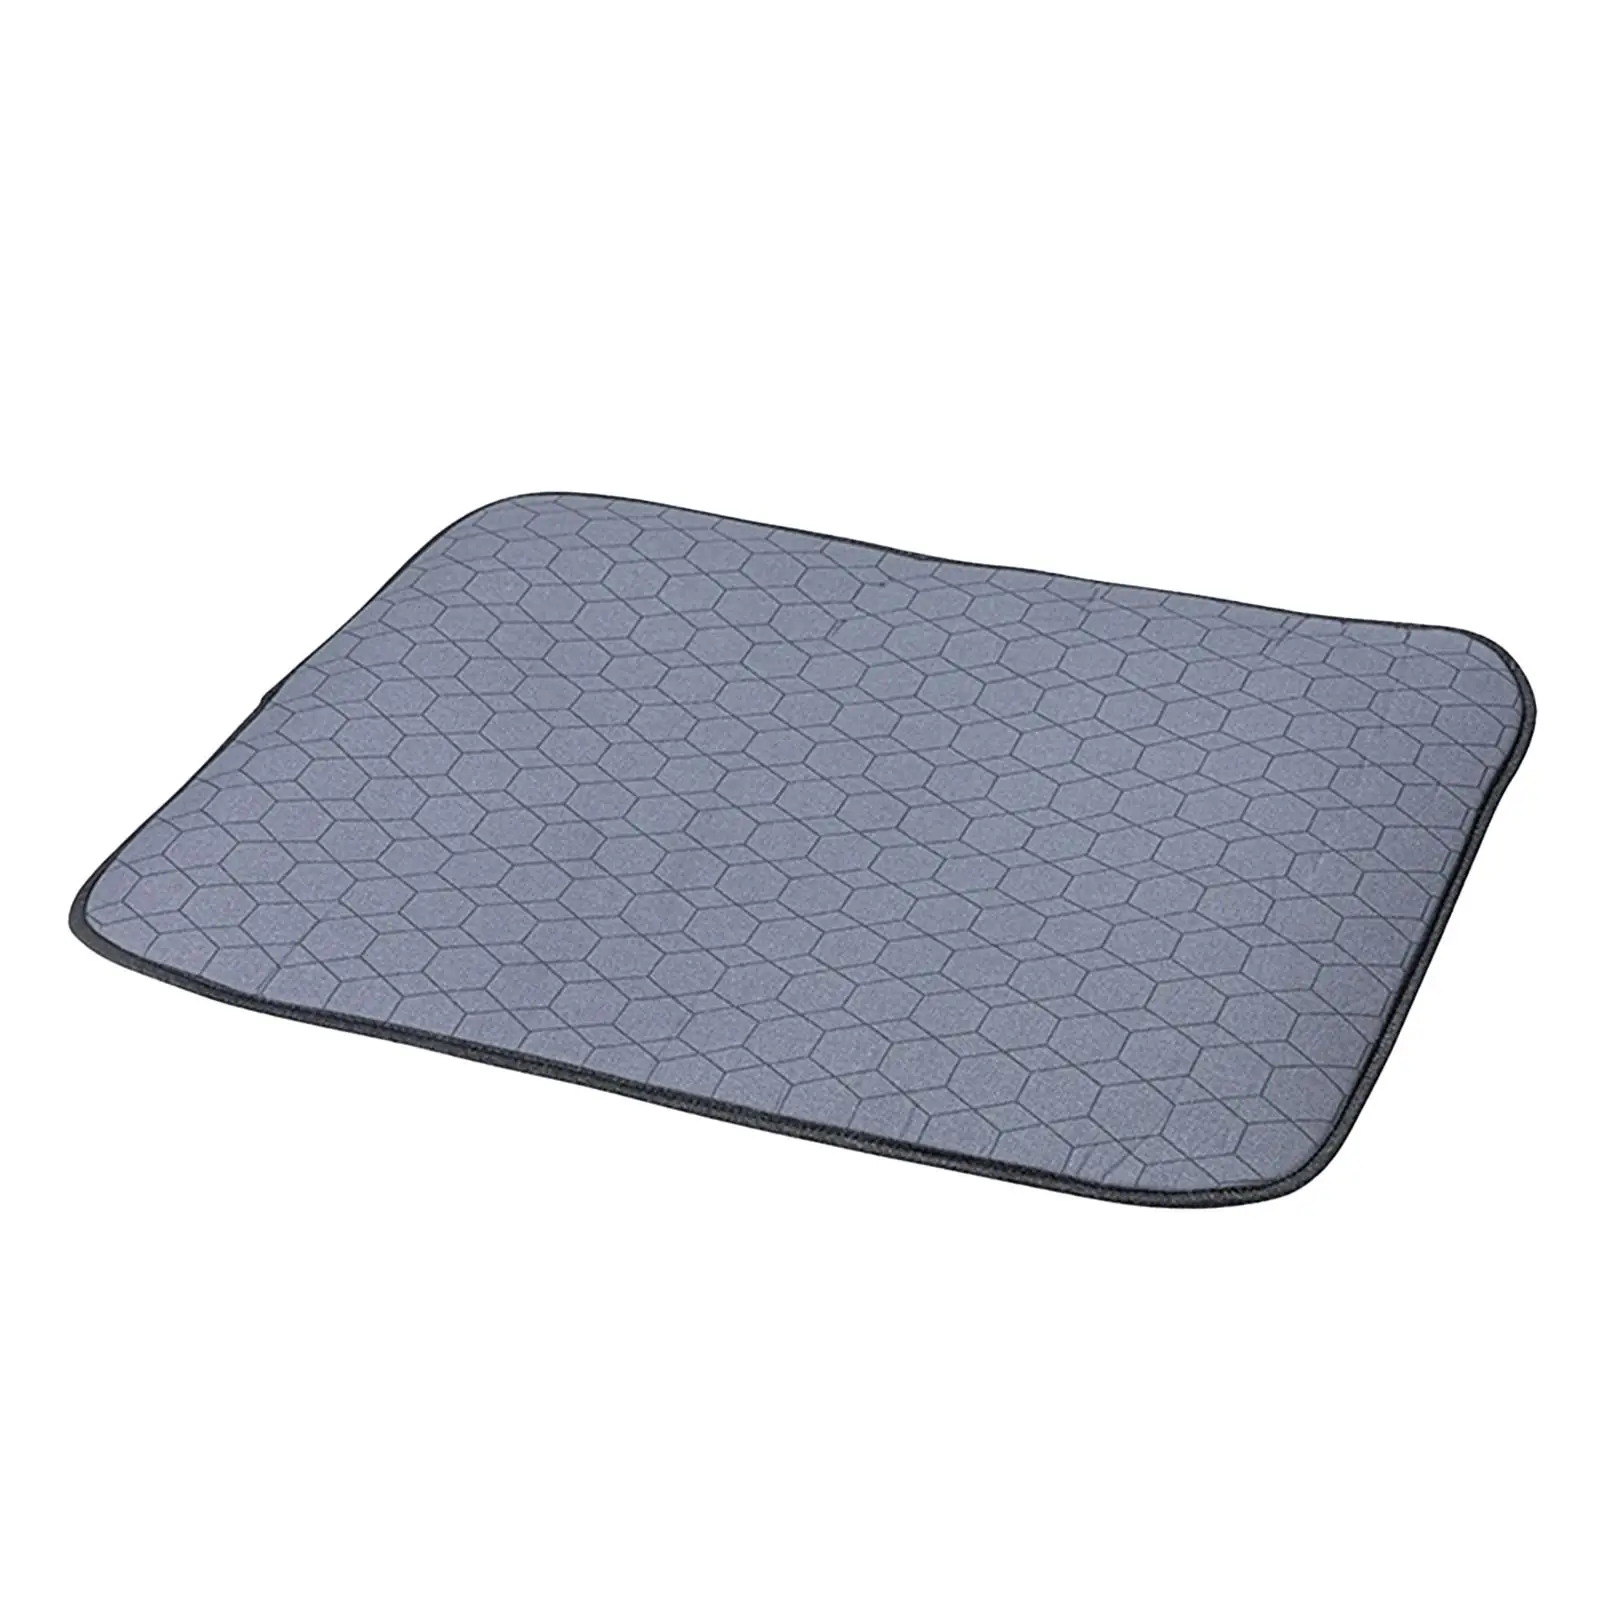 Ironing Mat Foldable Washable Ironing Board Foldable Iron Board Auxiliary Tool for Apartment Laundry Room Dorm Household Sleeves